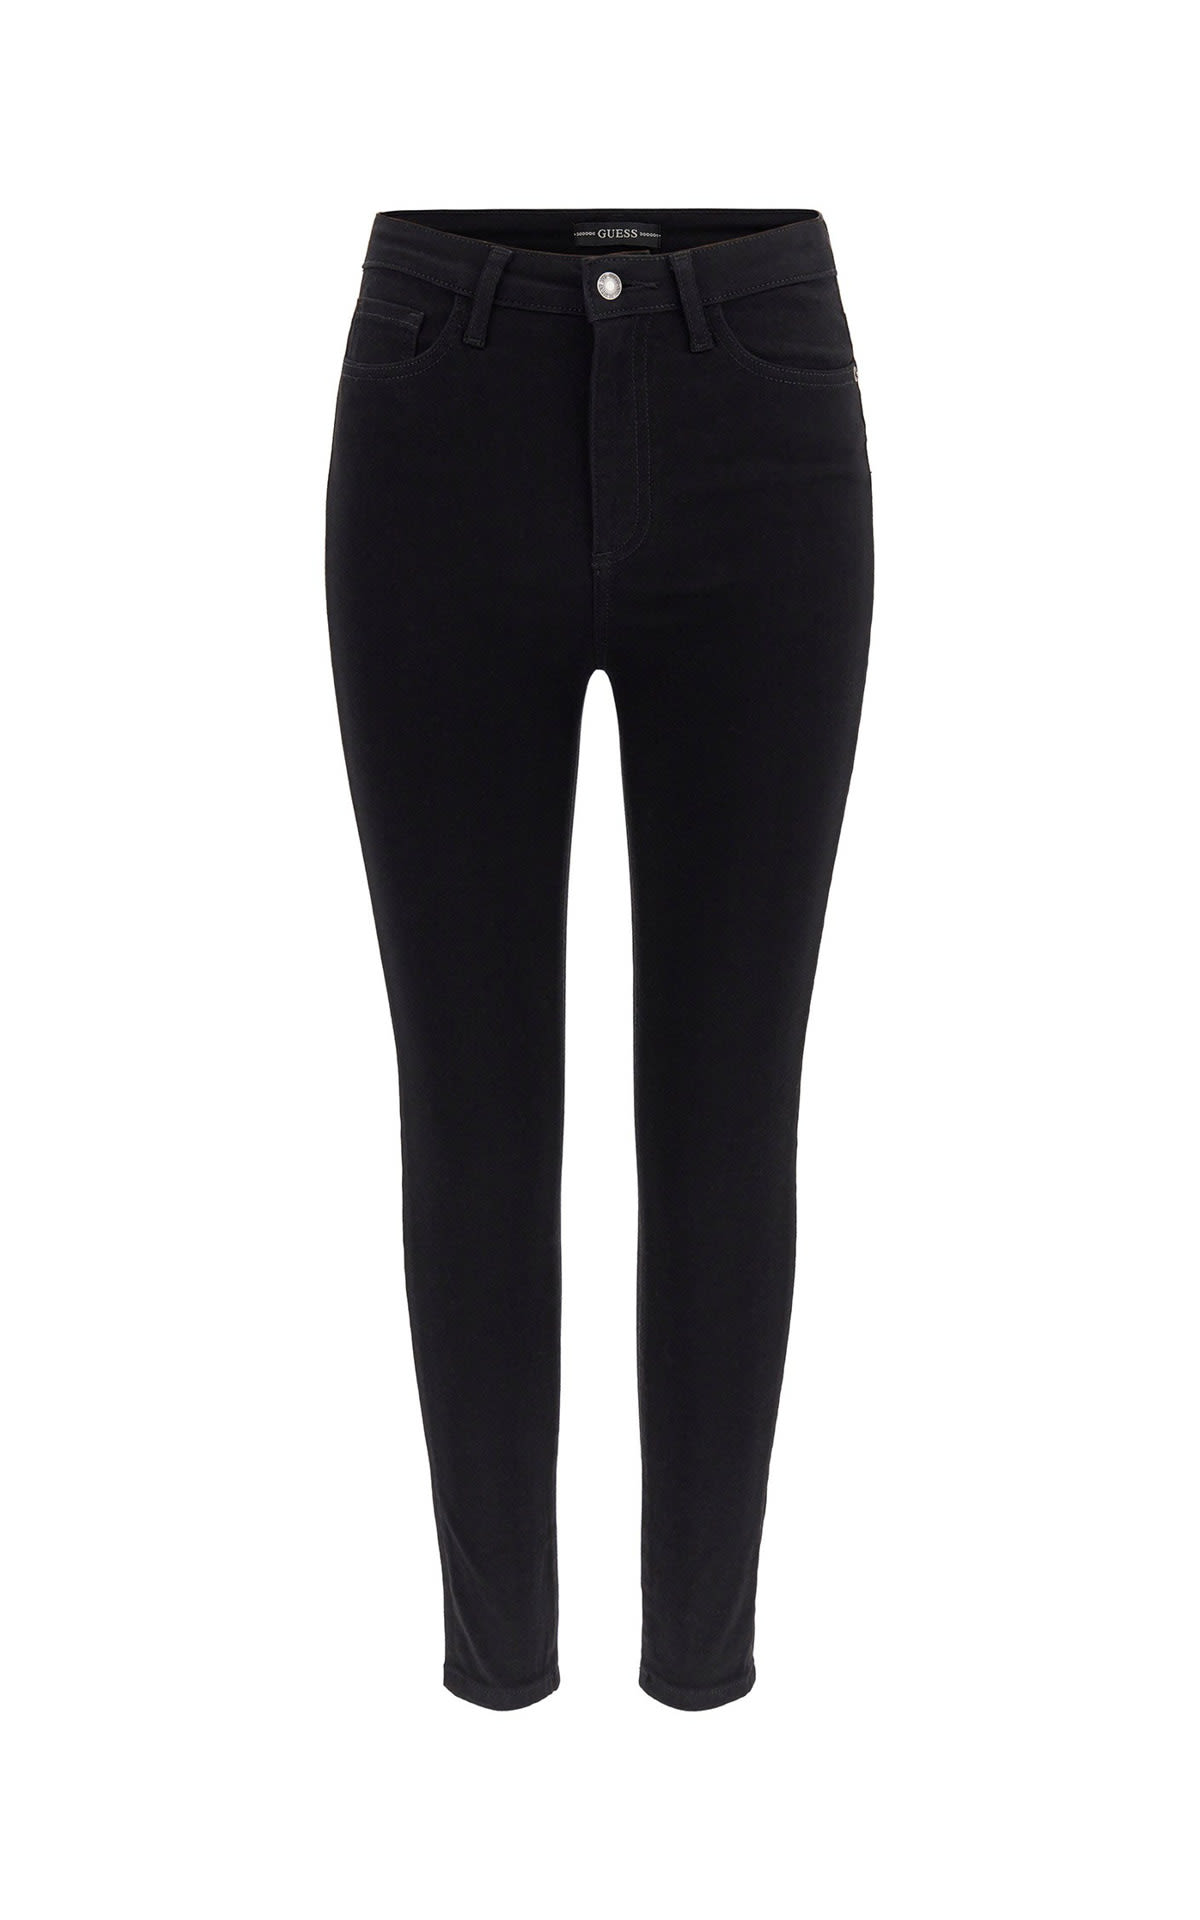 Guess black skinny jeans